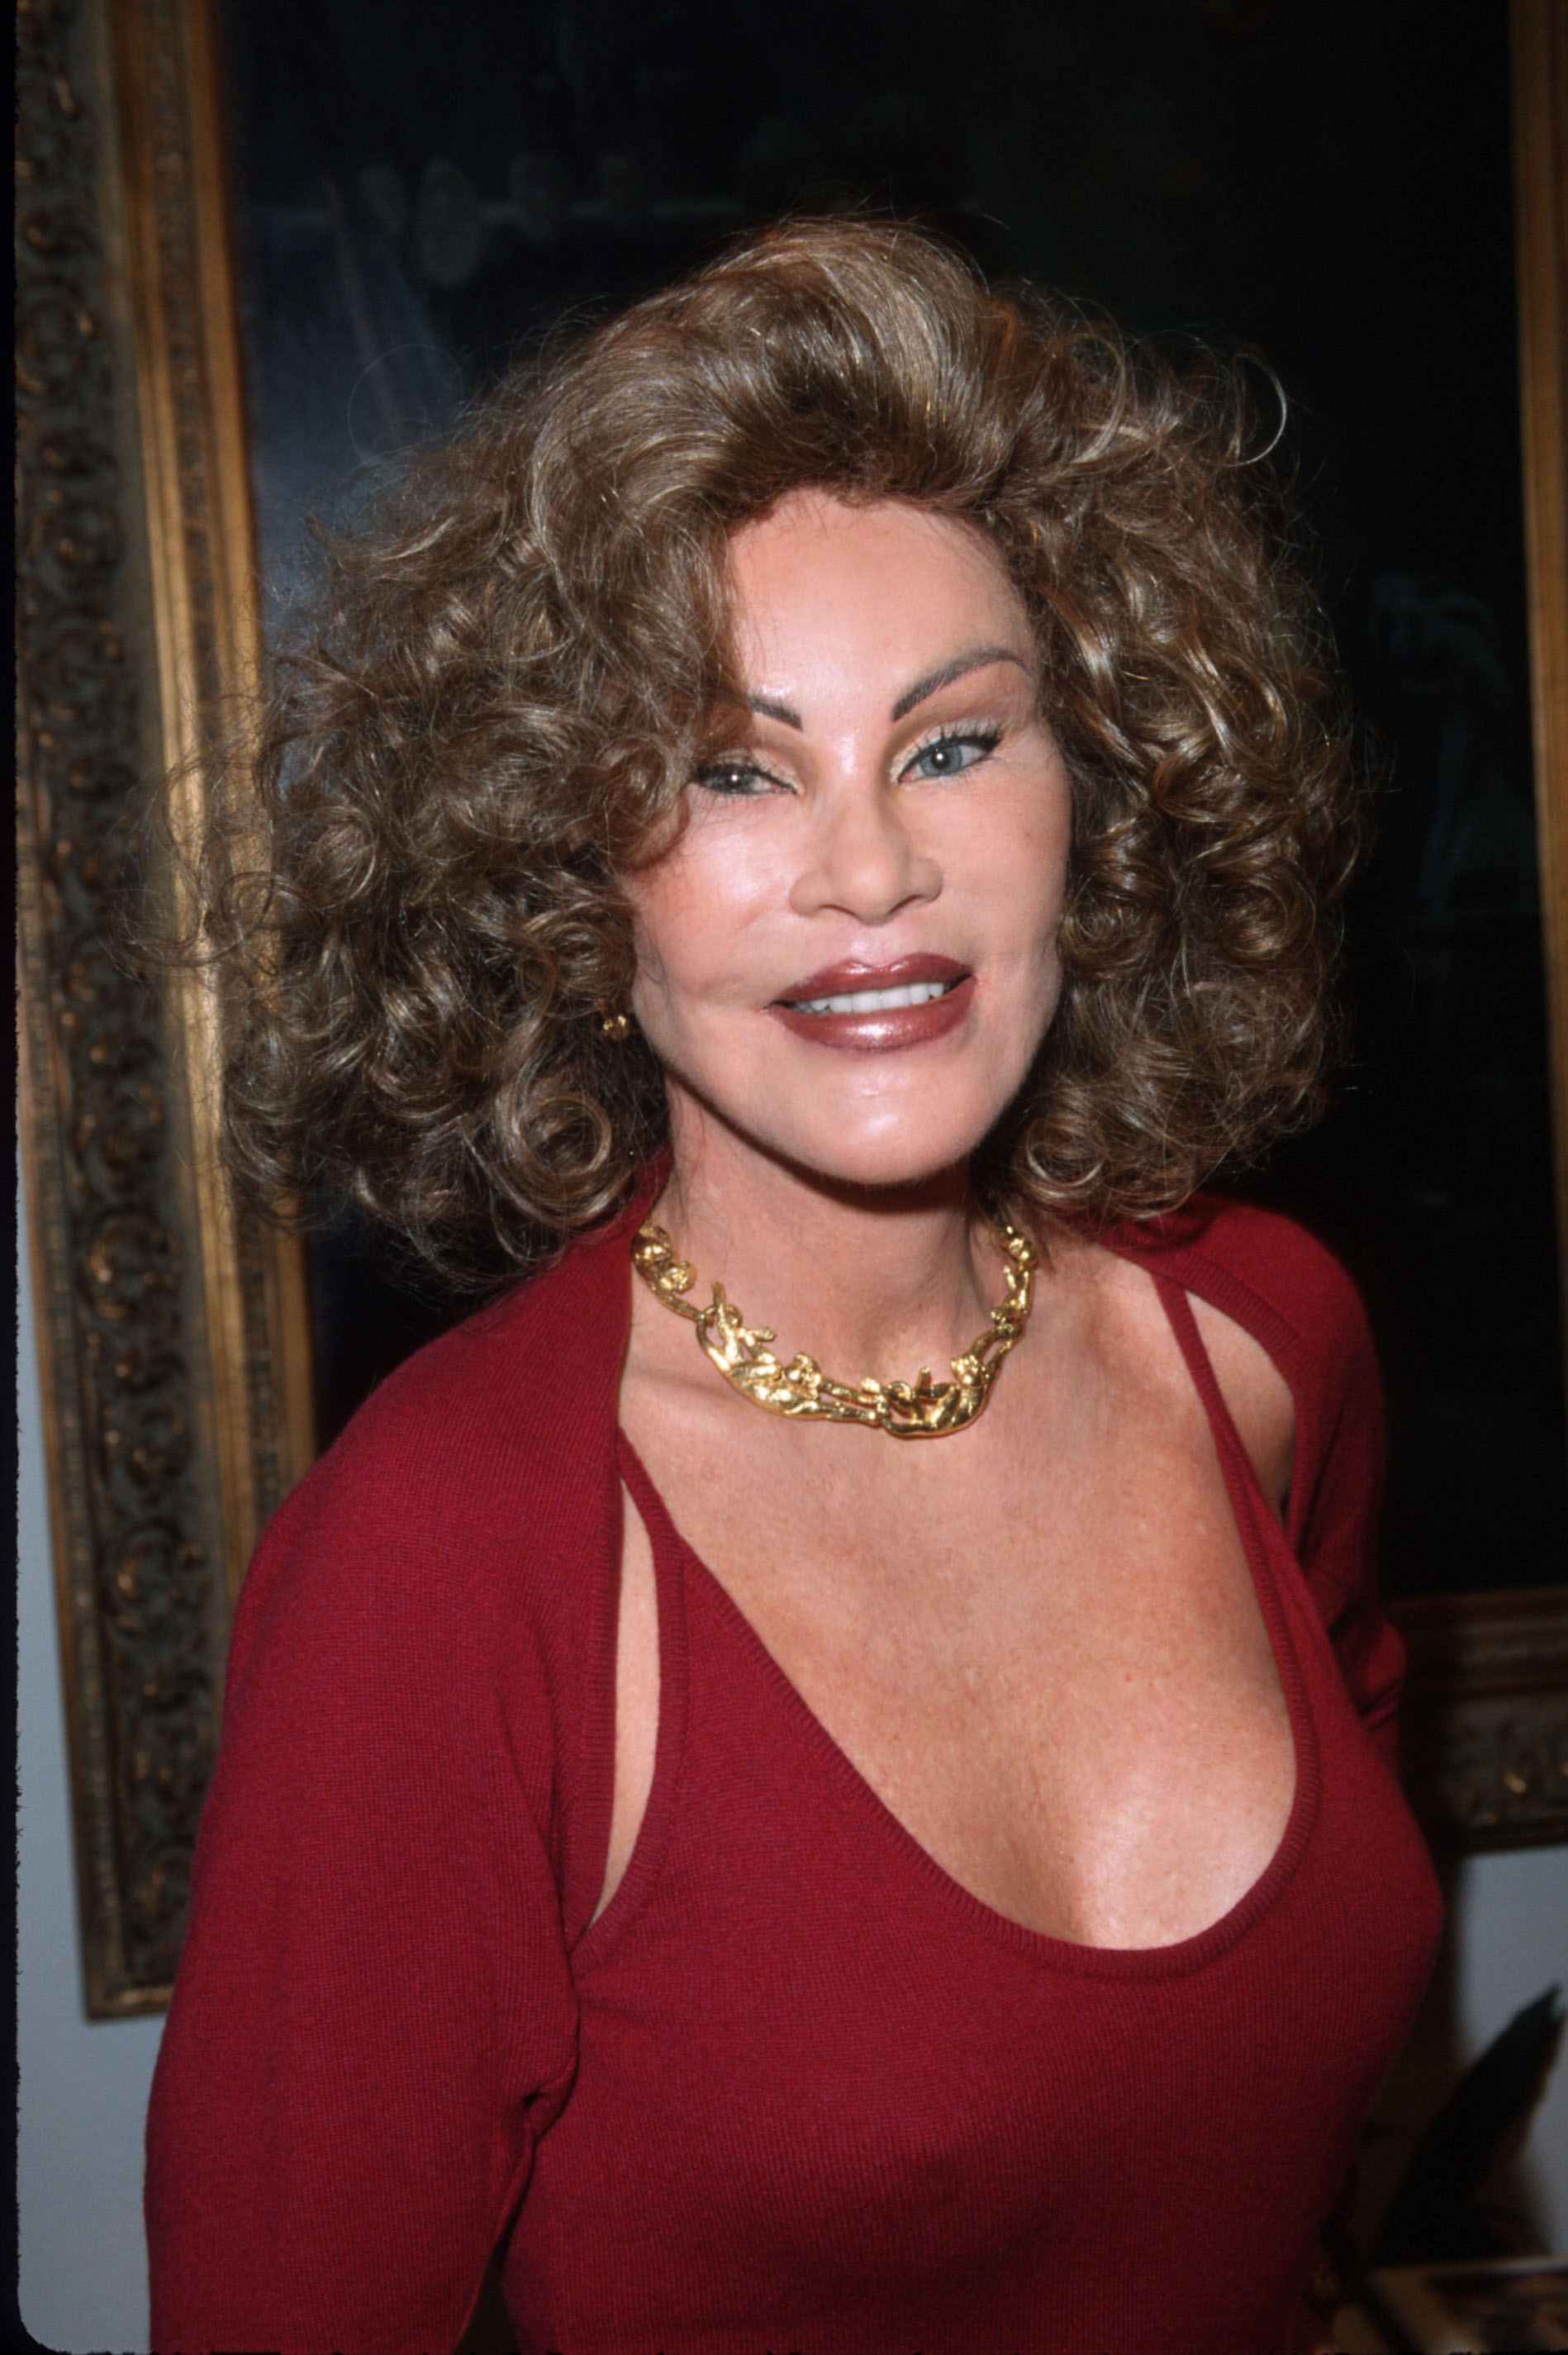 Jocelyne Wildenstein poses for a picture in New York City, on February 10, 1999. | Source: Getty Images